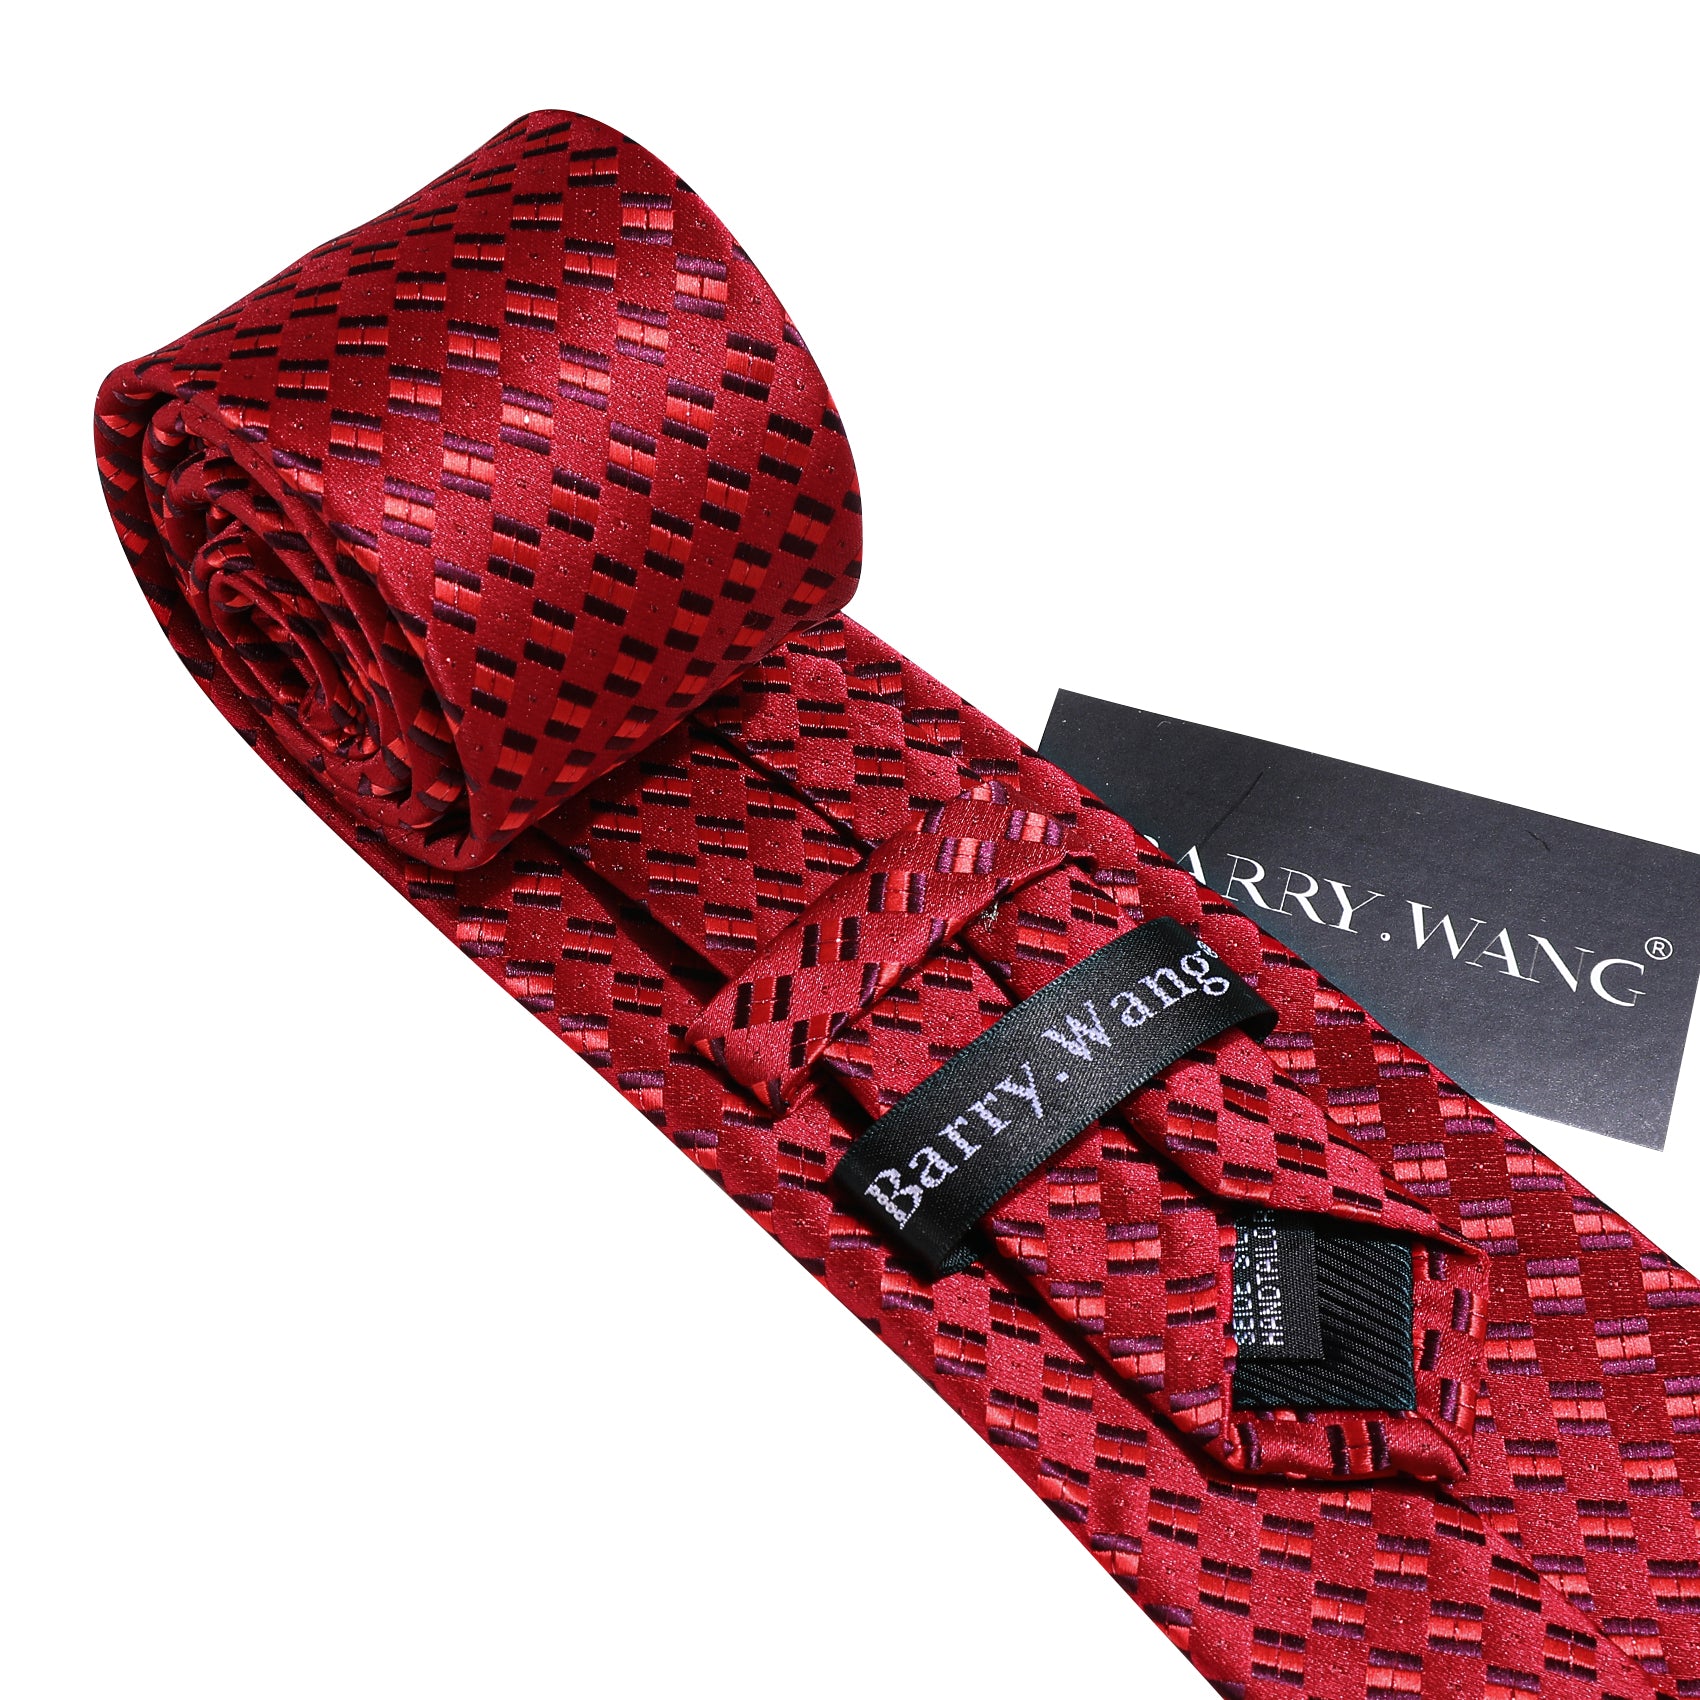 New Novetly Red 59 Inches Silk Tie Hanky Cufflinks Set